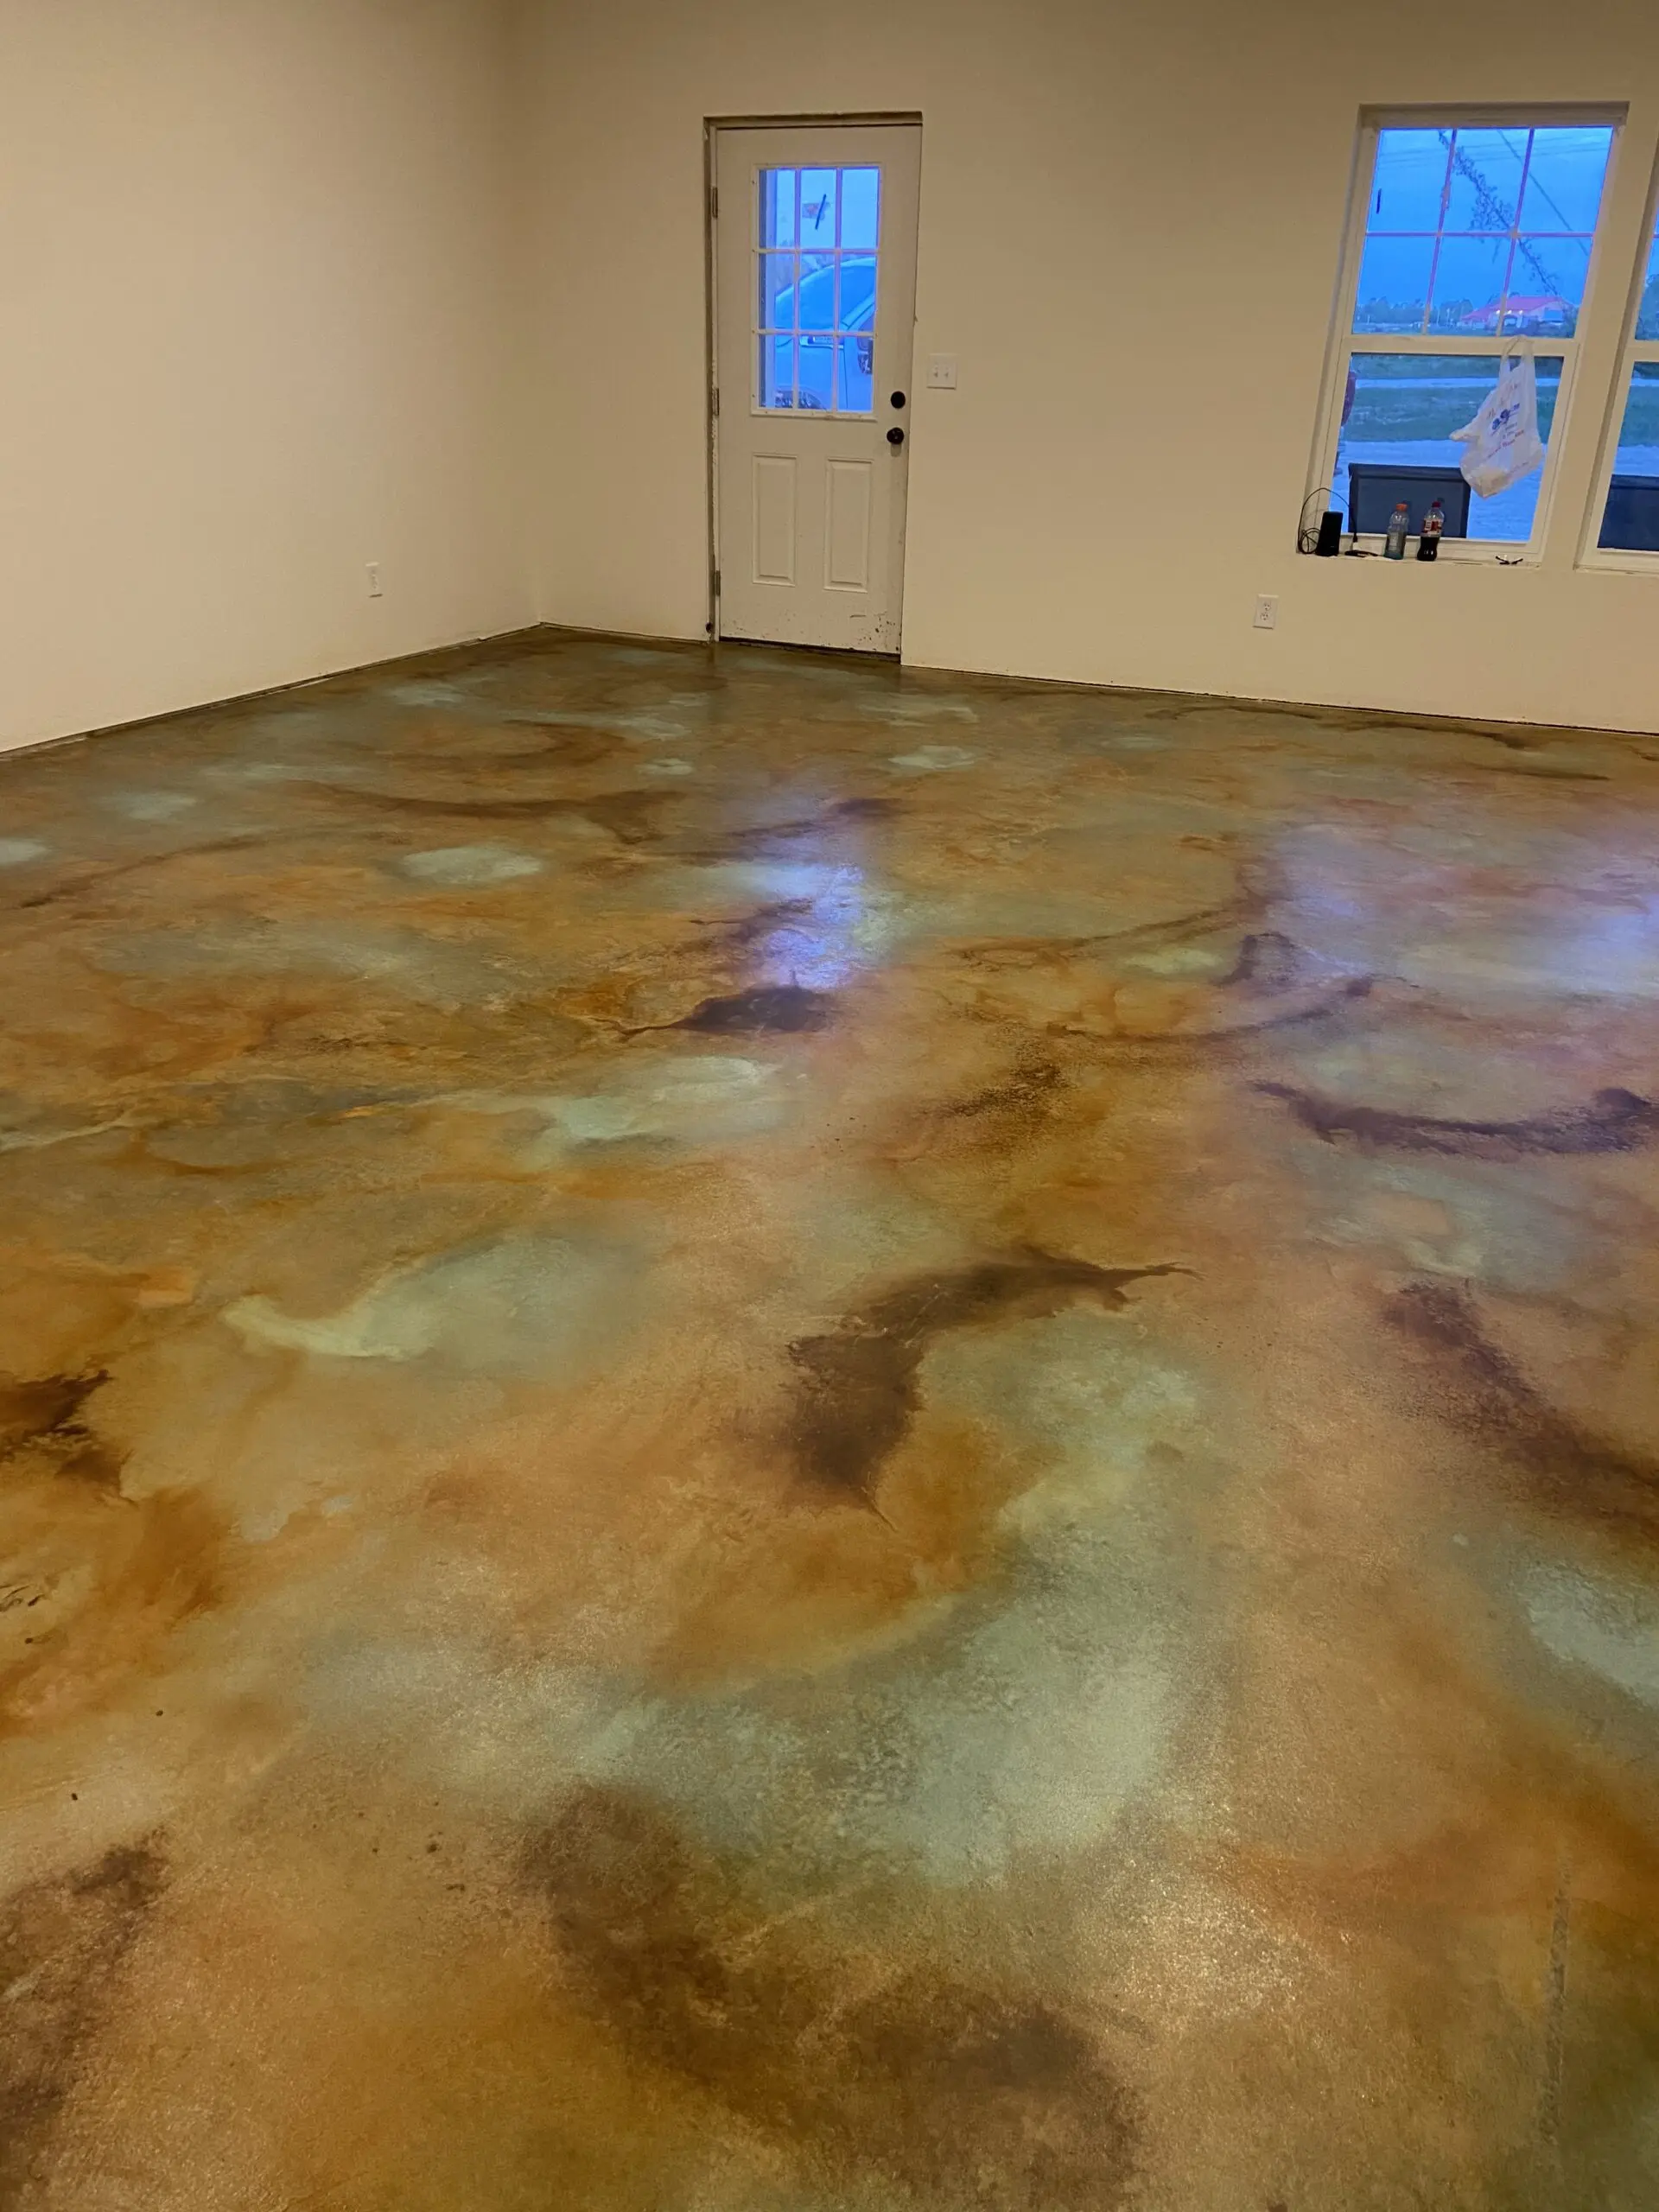 A photo displaying the final look of the stained concrete floor, exhibiting a beautiful mix of colors